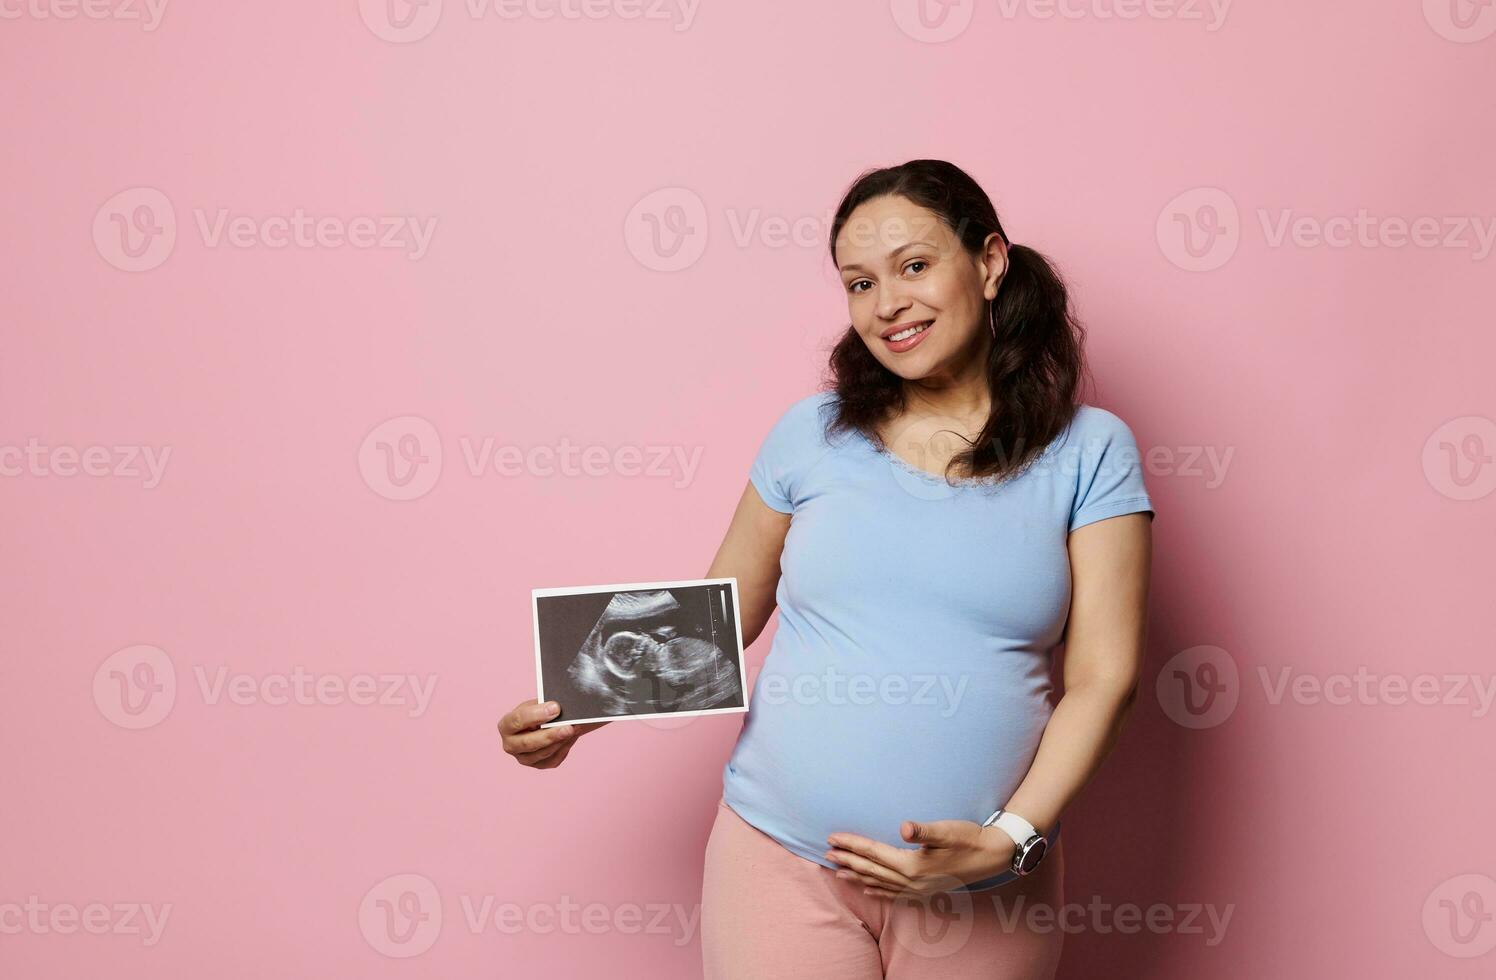 Gravid woman smiling at camera, holding baby ultrasound scan and caressing her pregnant belly, isolated pink background photo